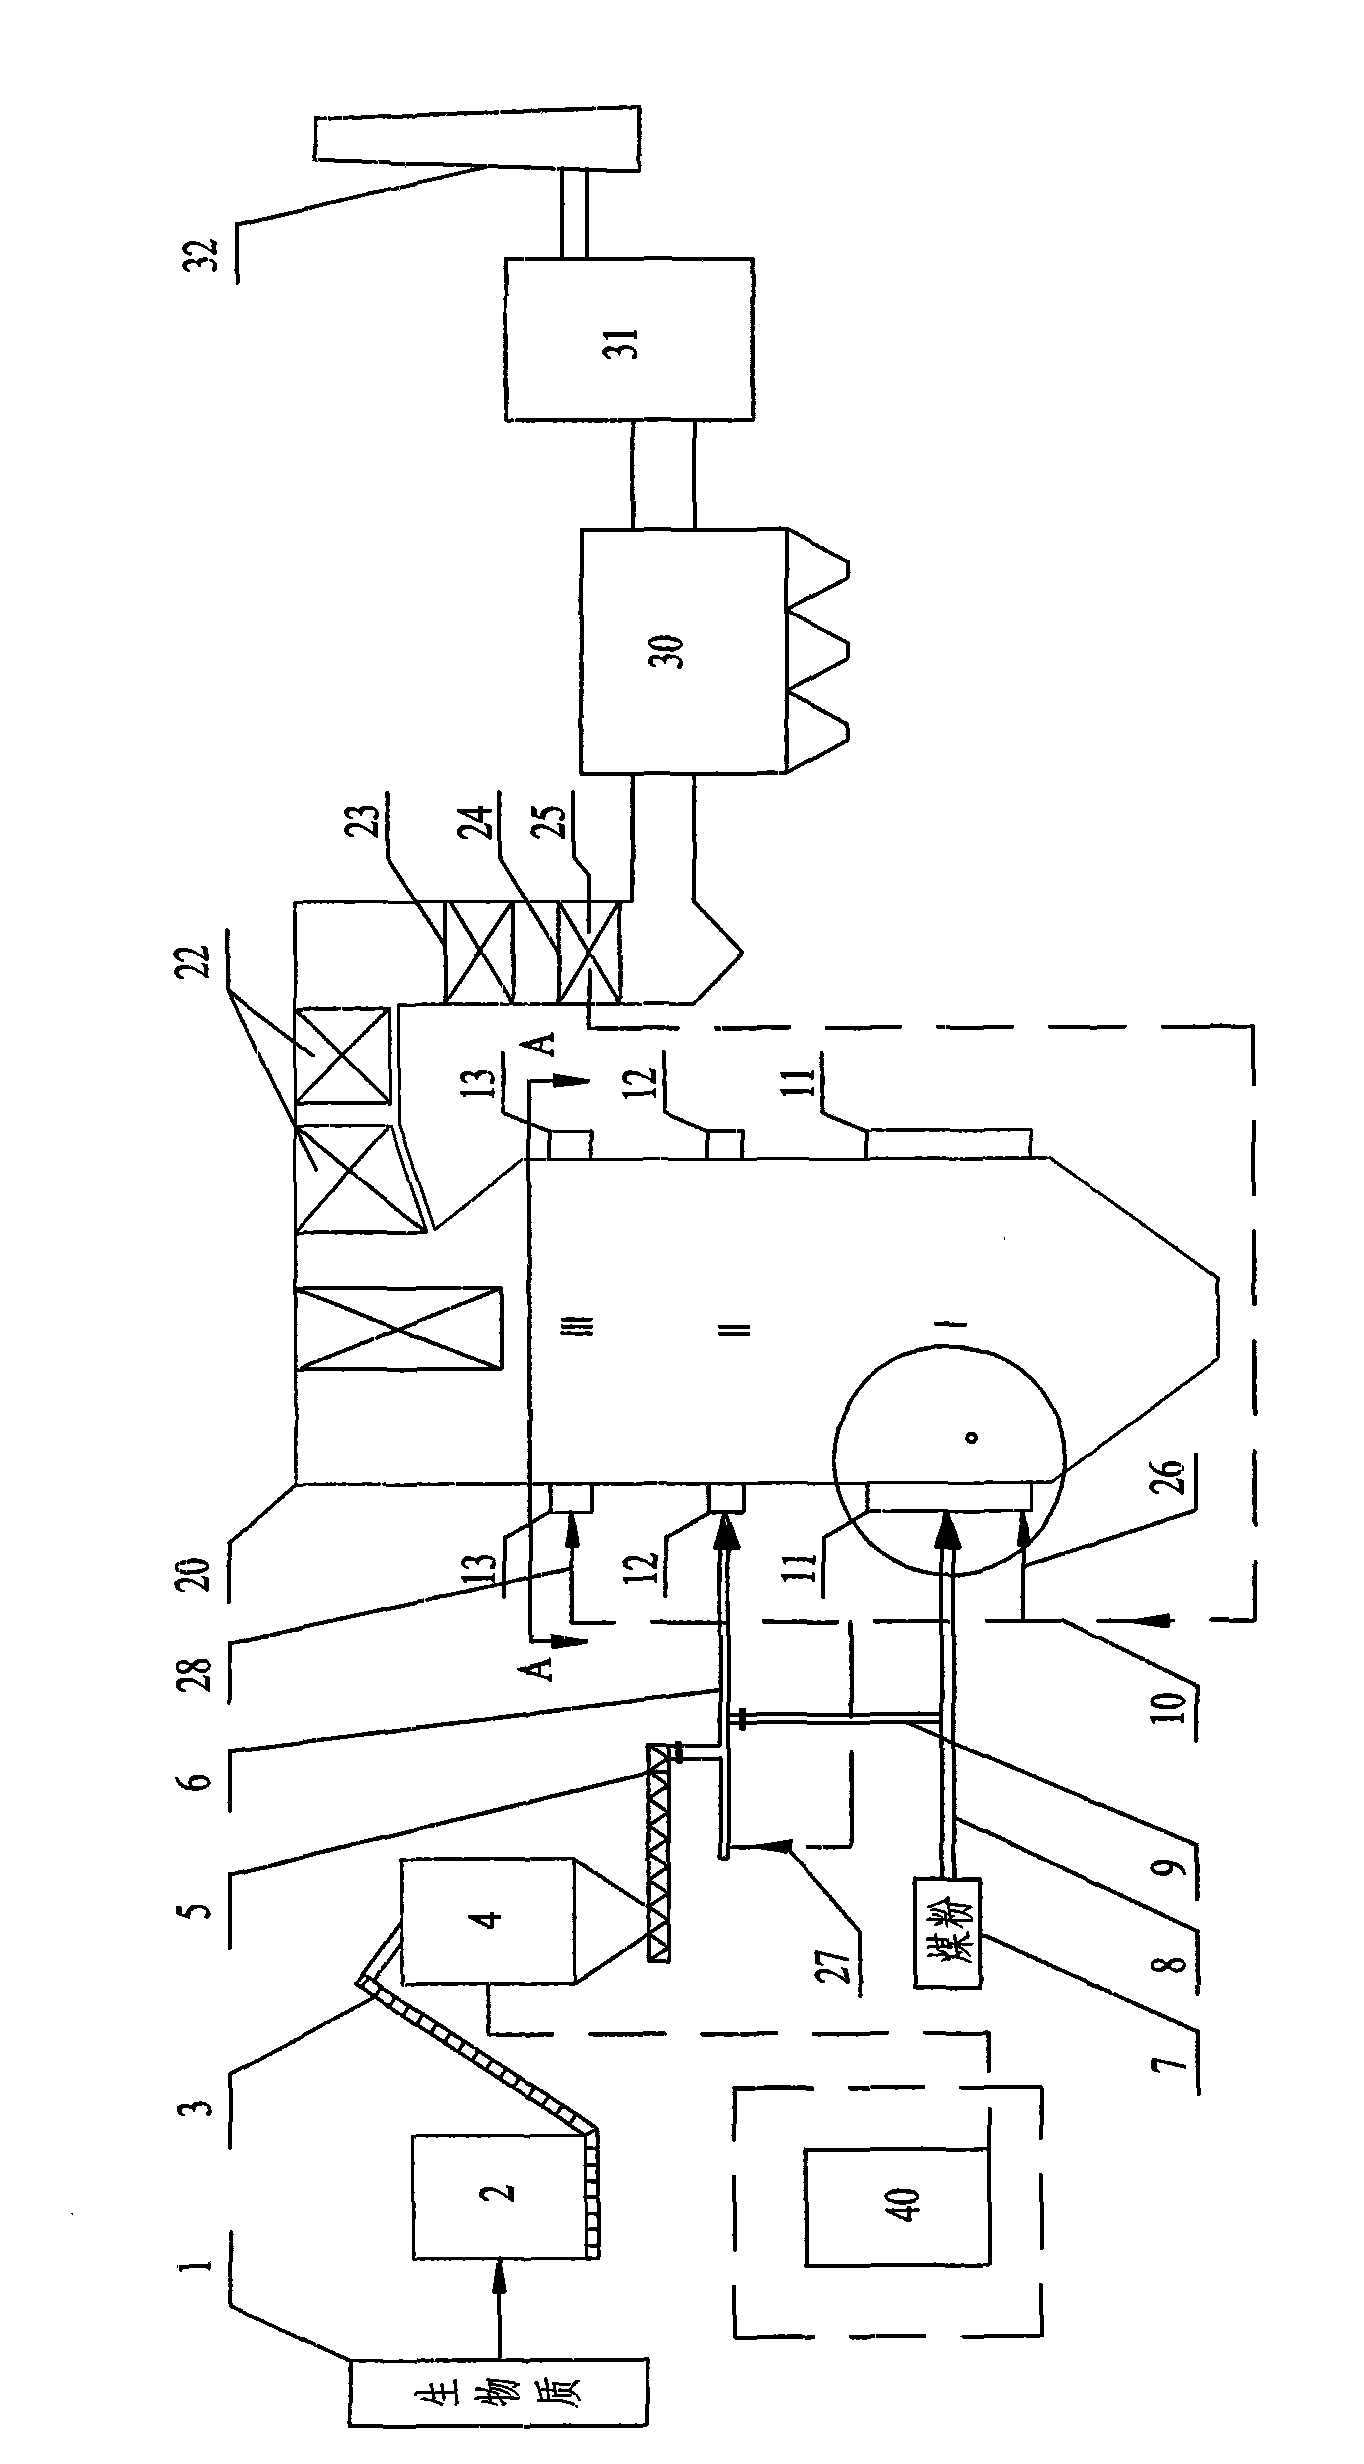 Method for jointly controlling emission of NOx by utilizing multi-stage bias combustion and fuel reburning